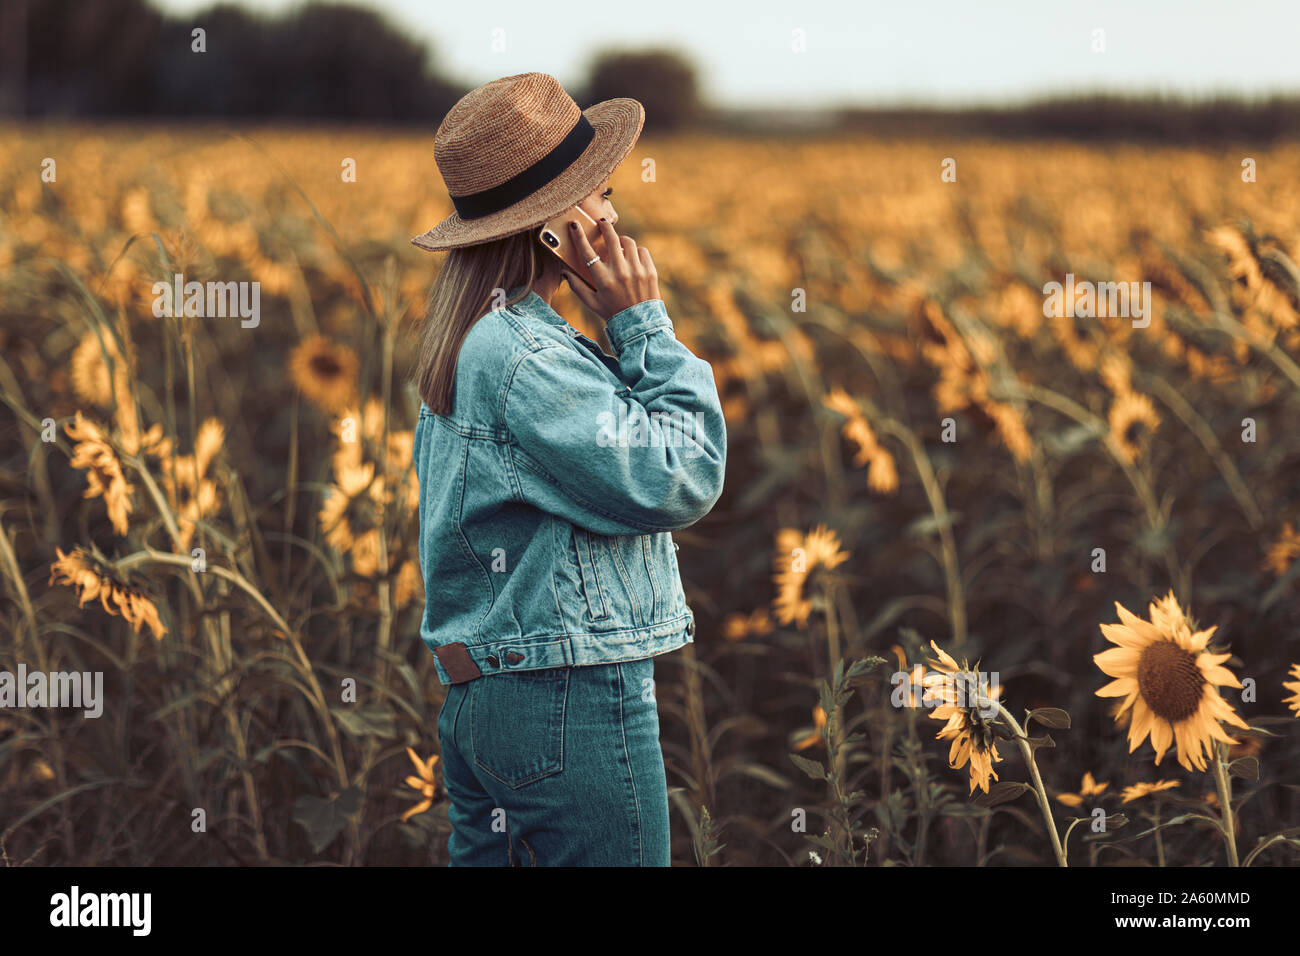 Young girl with blue denim jacket and hat calling in a field of sunflowers in the evening Stock Photo